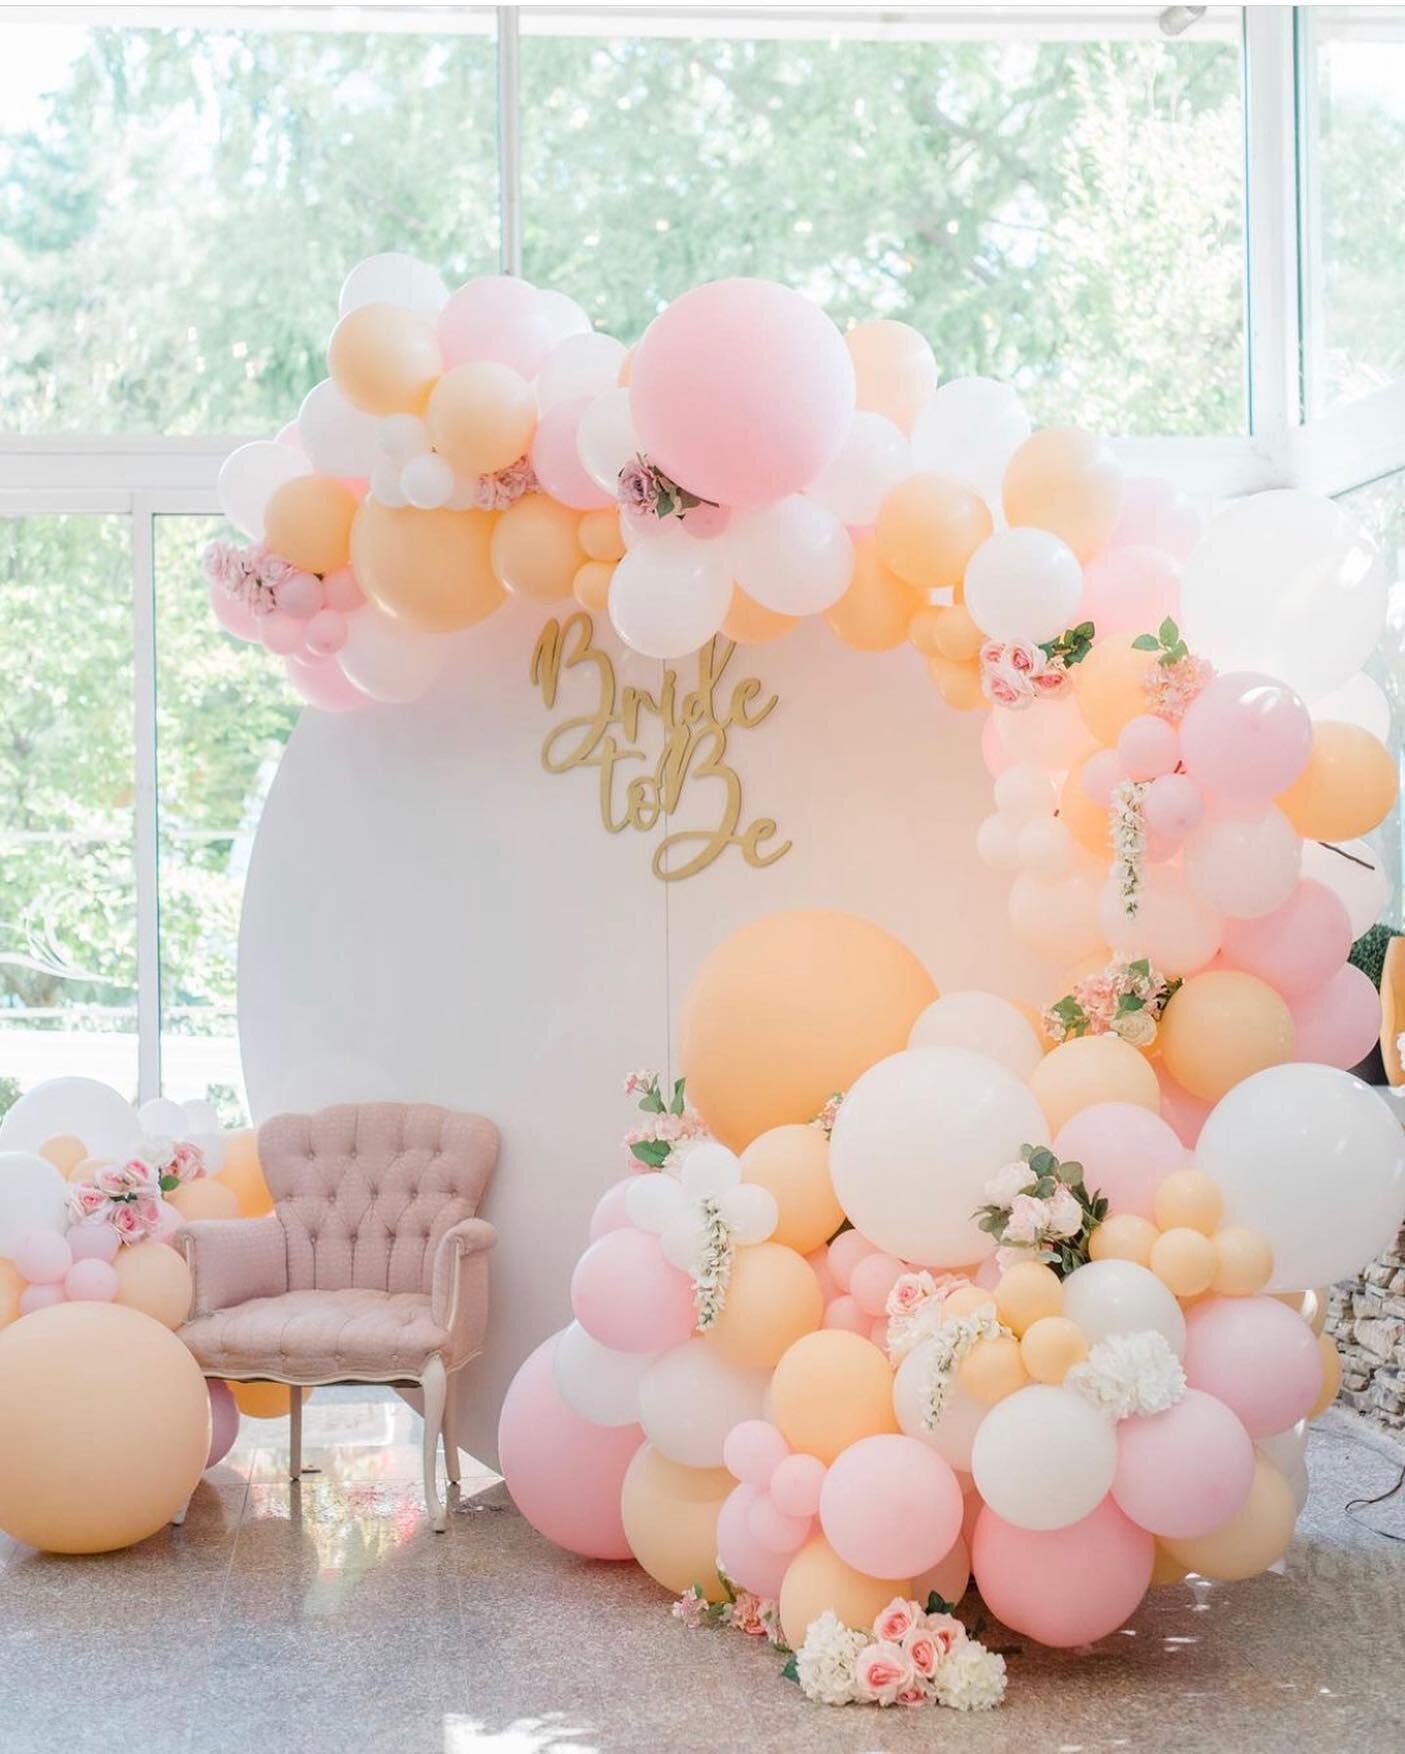 Shower season is soon approaching!  Here&rsquo;s a lil Nanette chair feature under a gorgeous balloon installation by @balloonsbysorin + backdrop by @jl_craftdesign 💕 📸: @kericalabrese